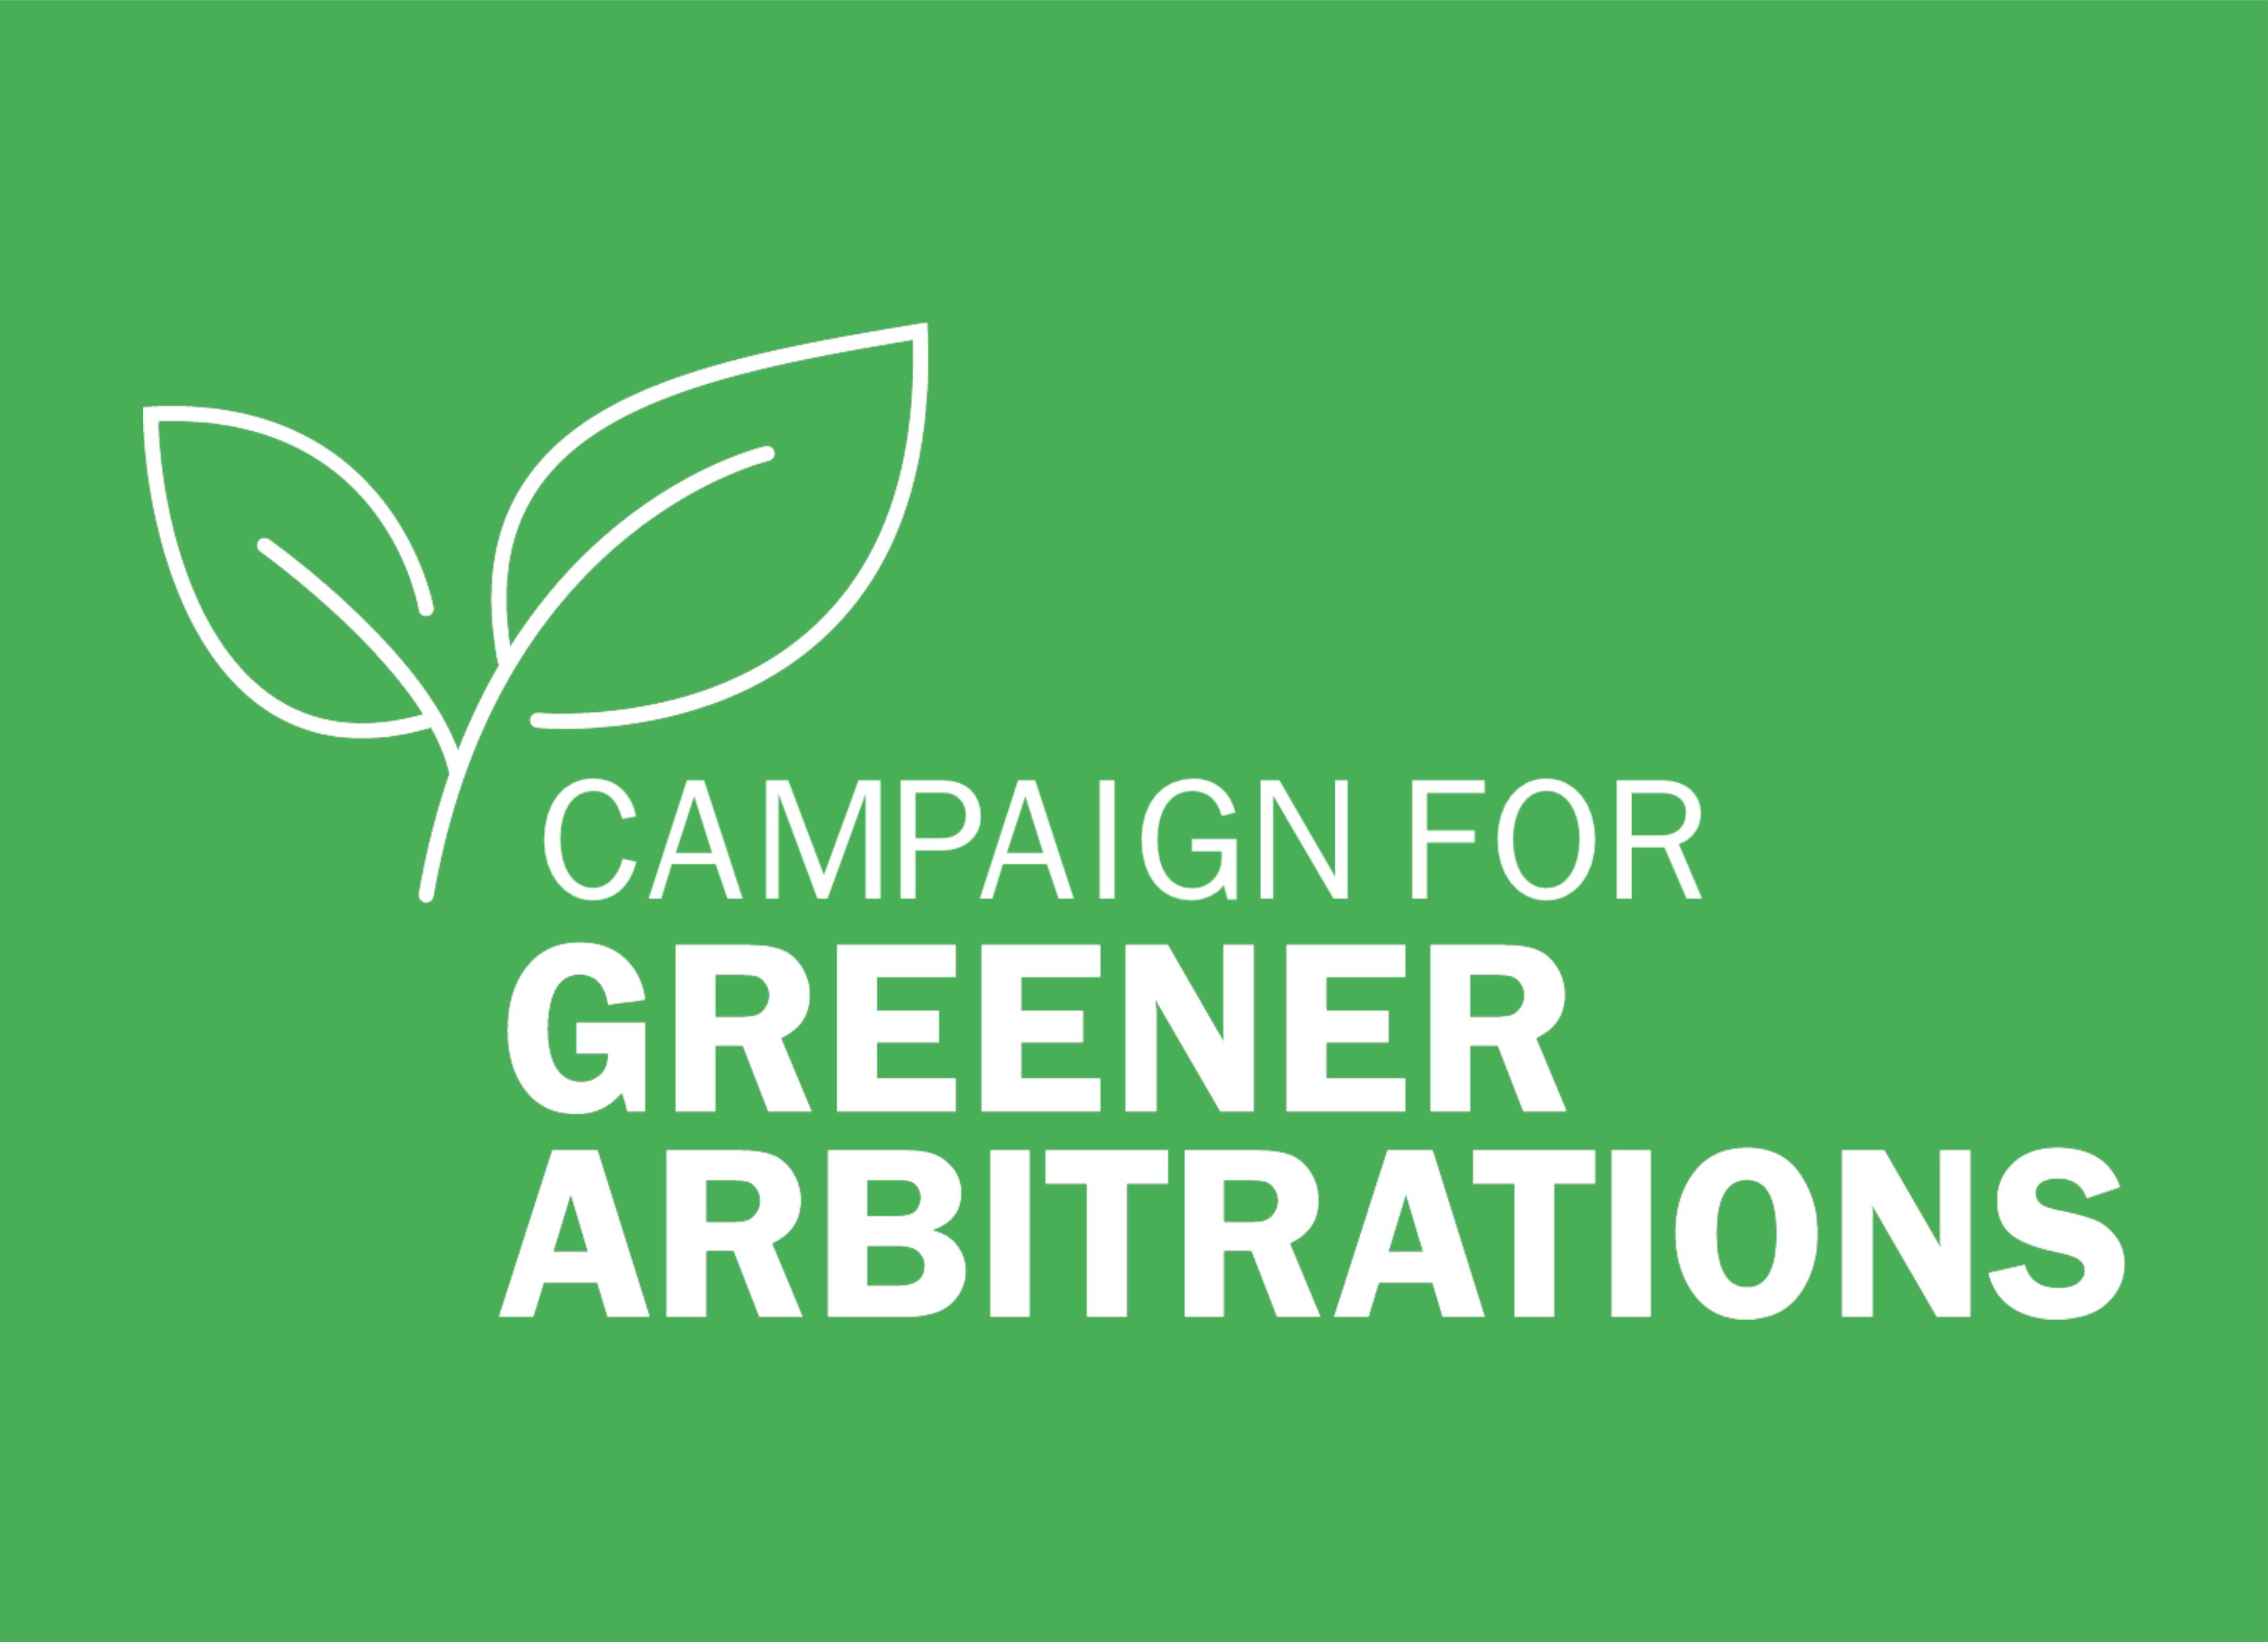 BIA Court of Arbitration became part of the Campaign for Greener Arbitrations (CGA)